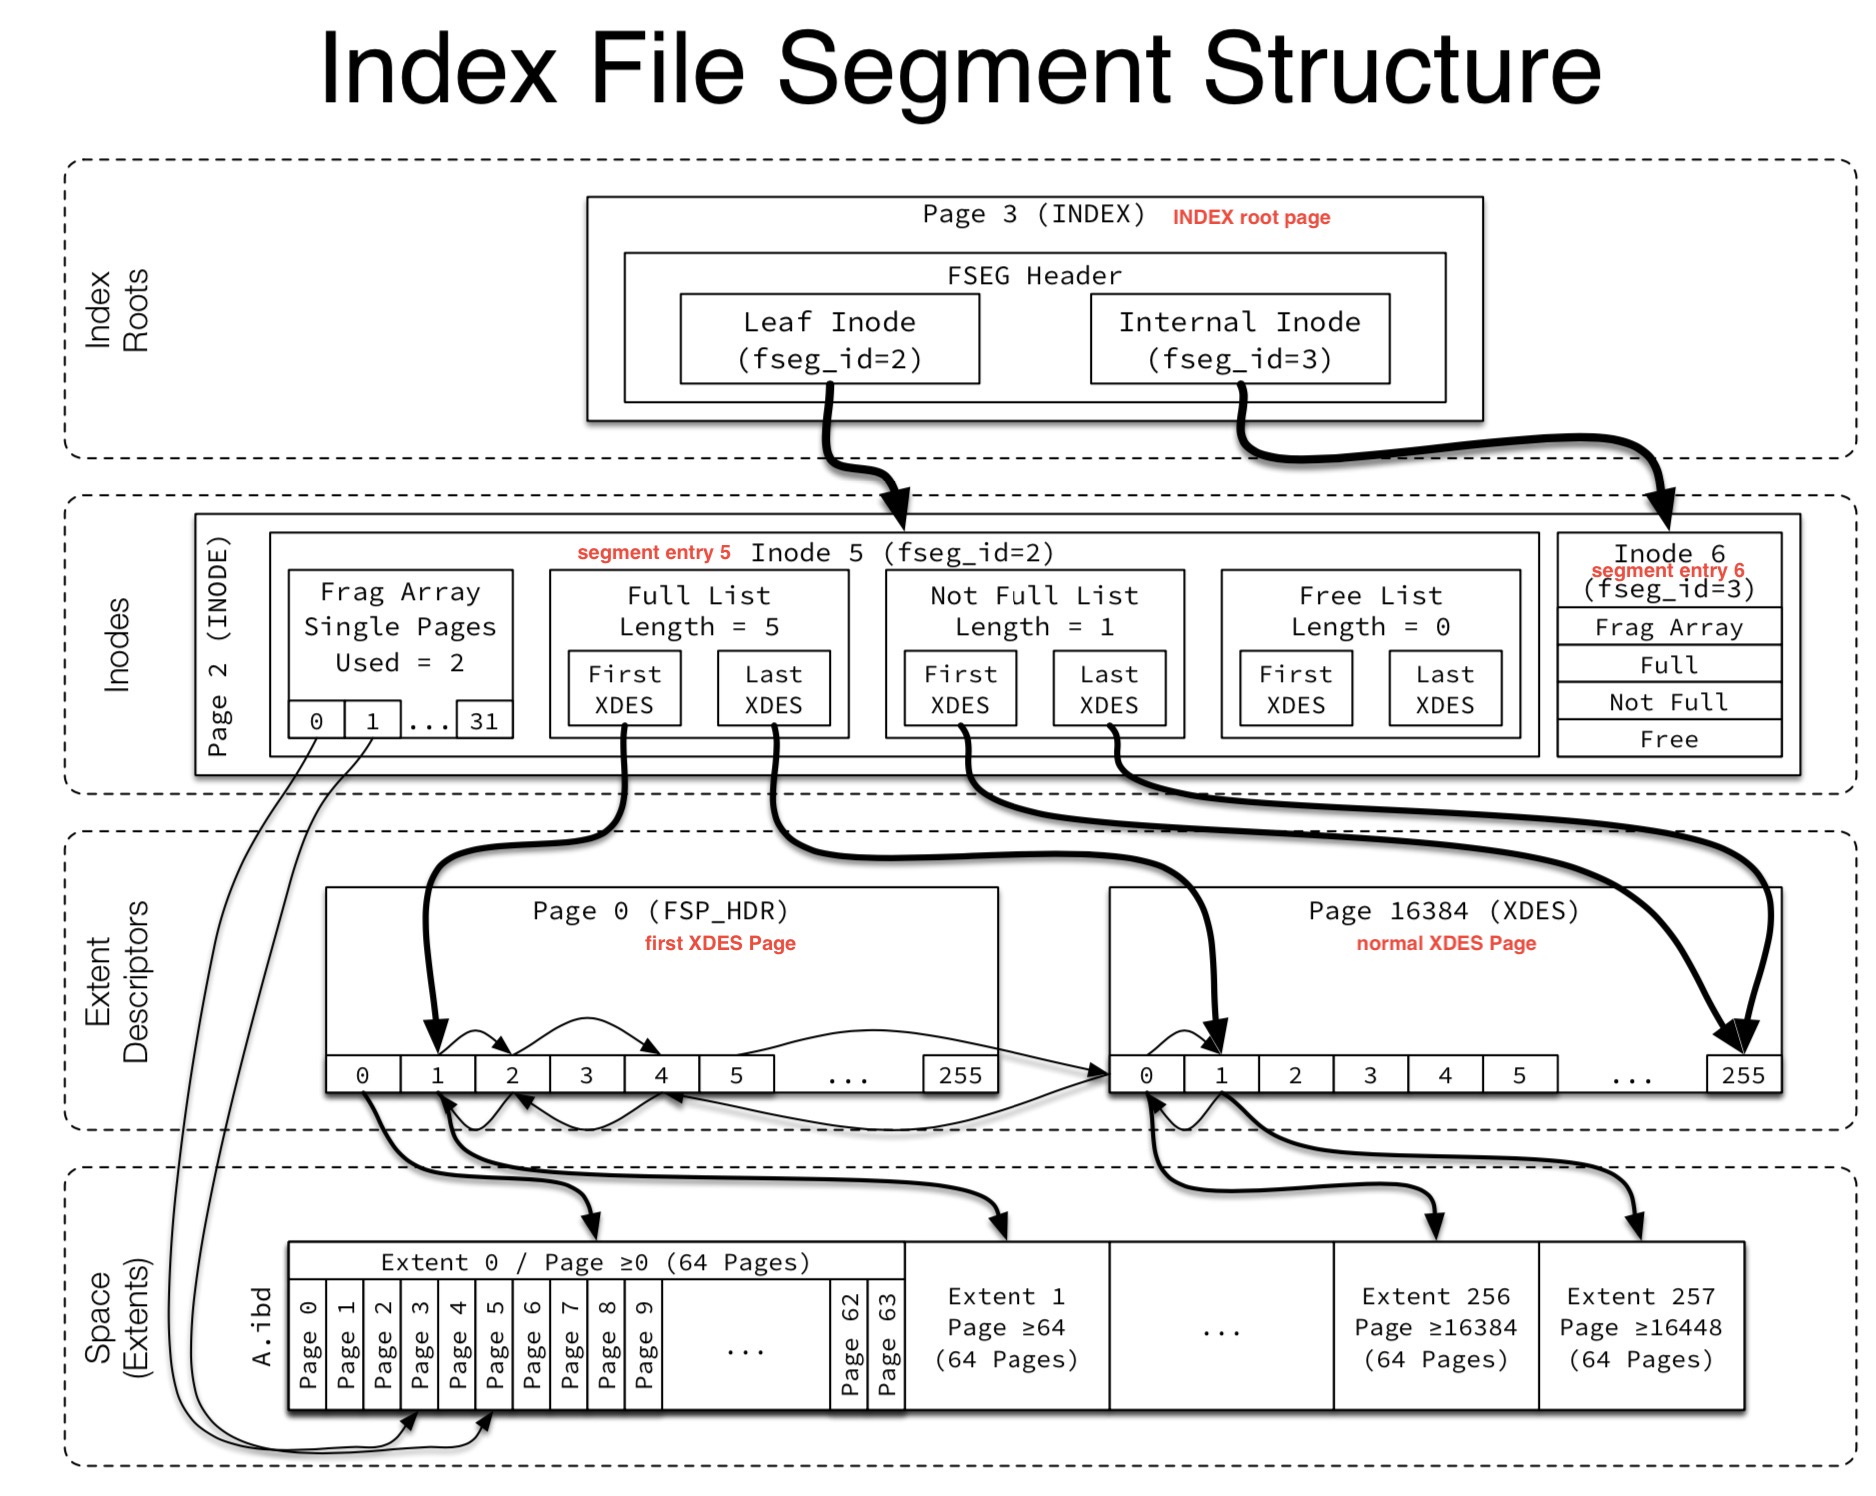 Index File Segment Structure with Comments